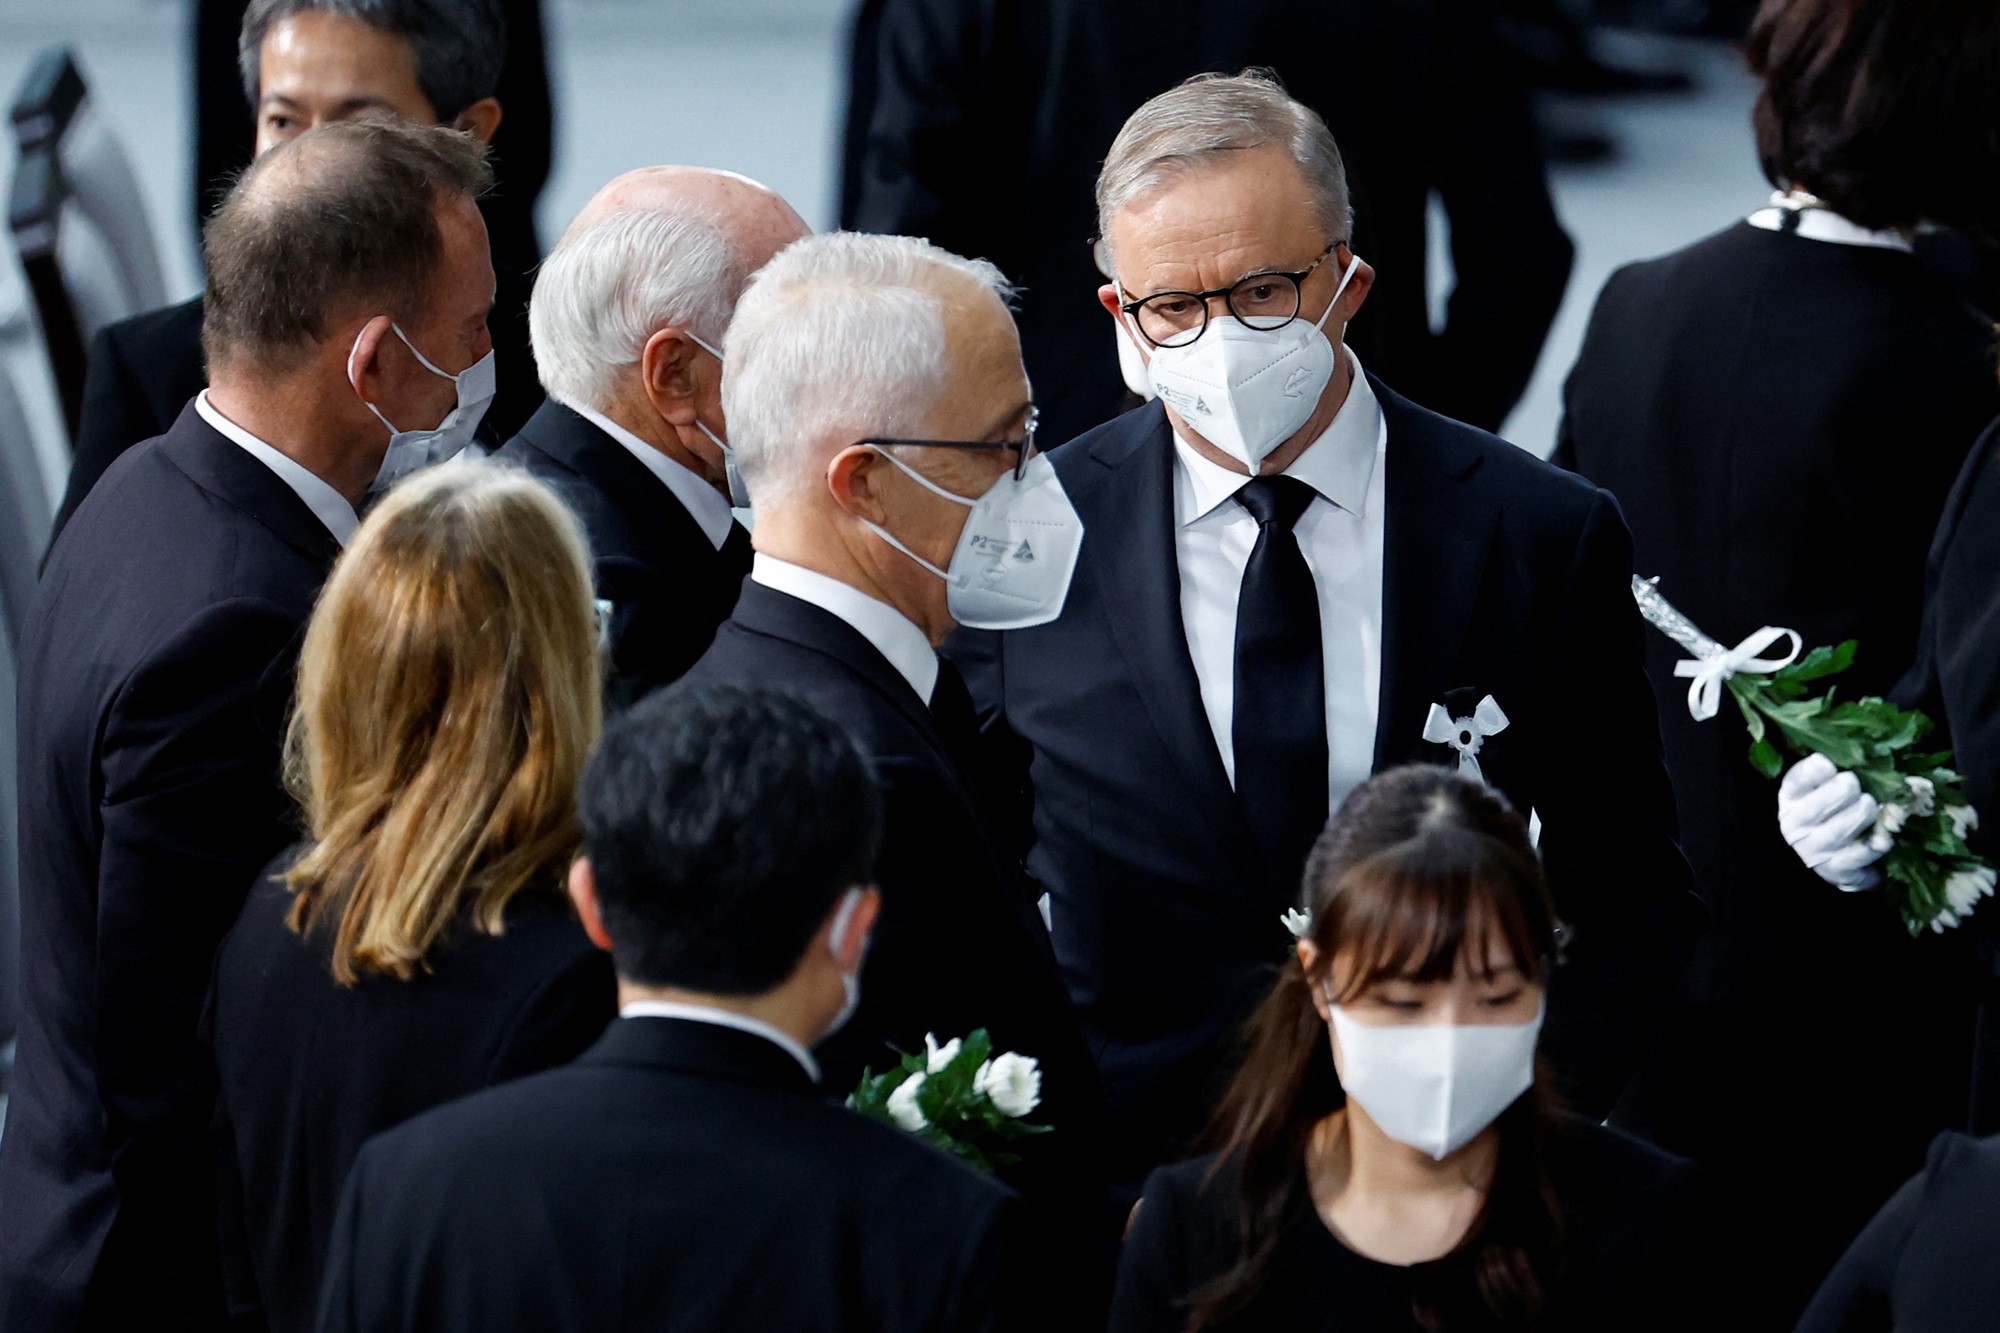 Australian Prime Minister Anthony Albanese attends a state funeral for former Japanese Prime Minister Shinzo Abe at Nippon Budokan Hall in Tokyo, Japan, September 27, 2022. 